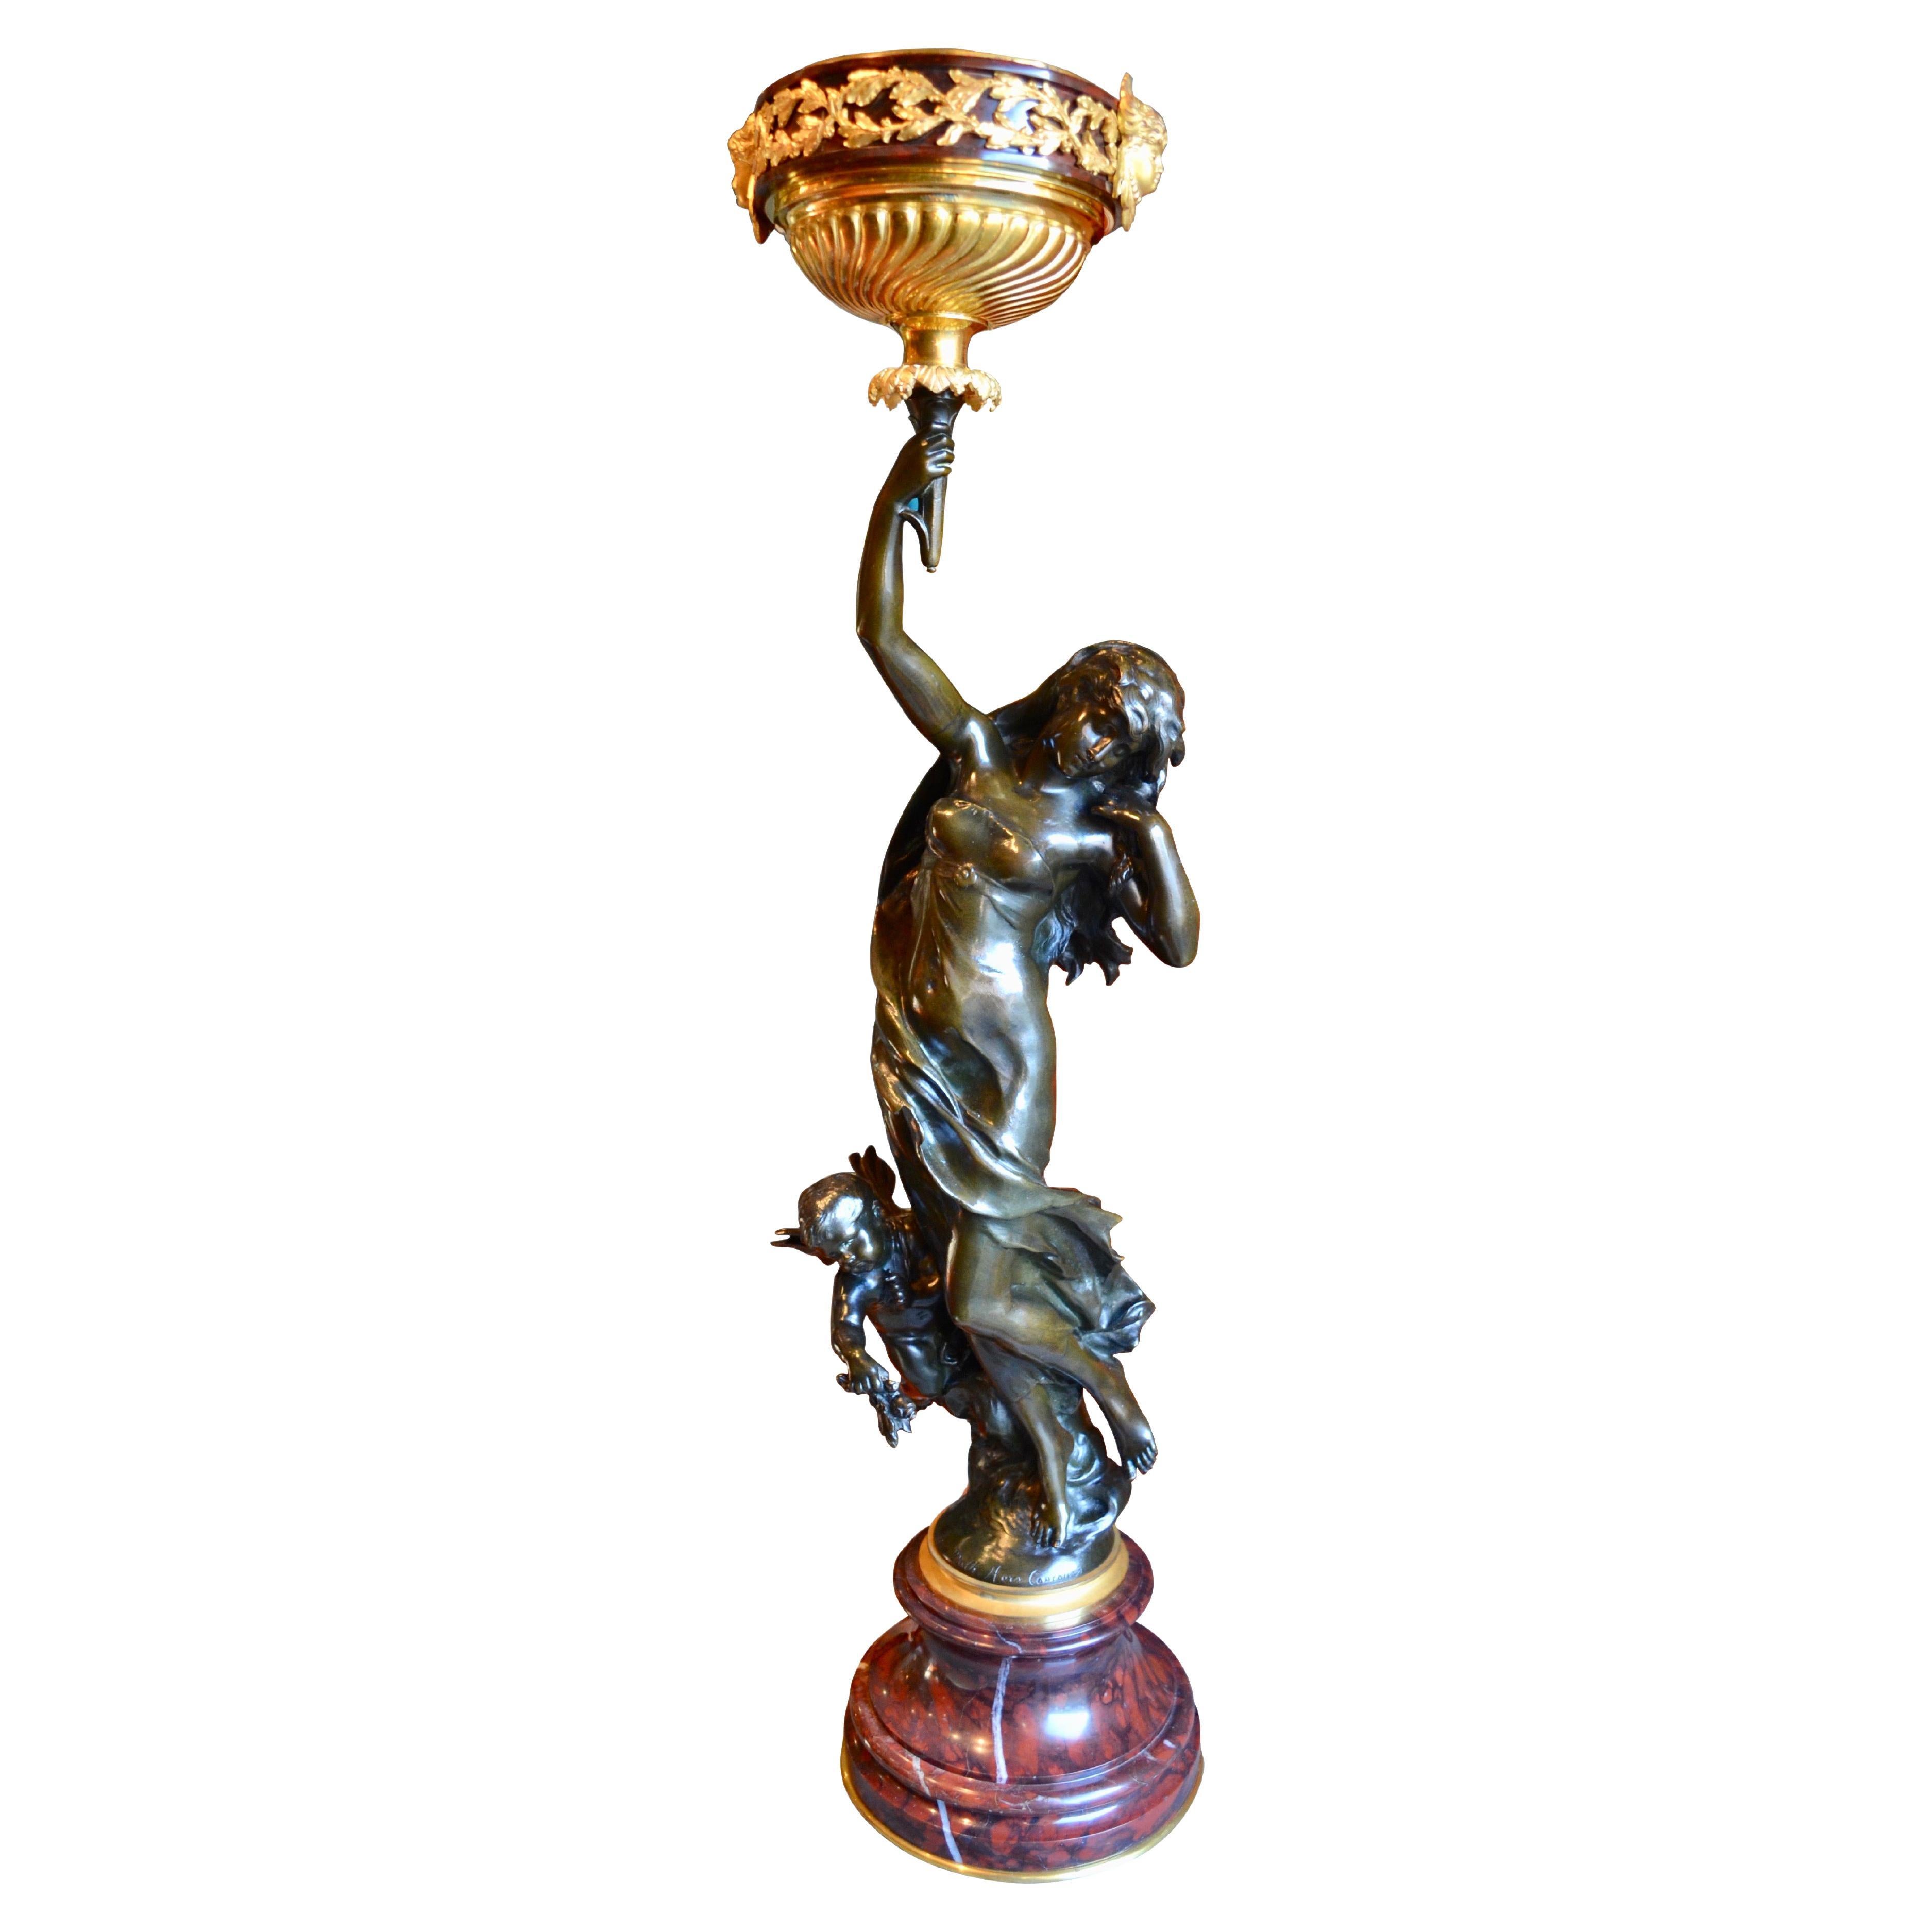  Oil Lamp Featuring a Mathurin Moreau Bronze Statue of  a Nymph and Putto  